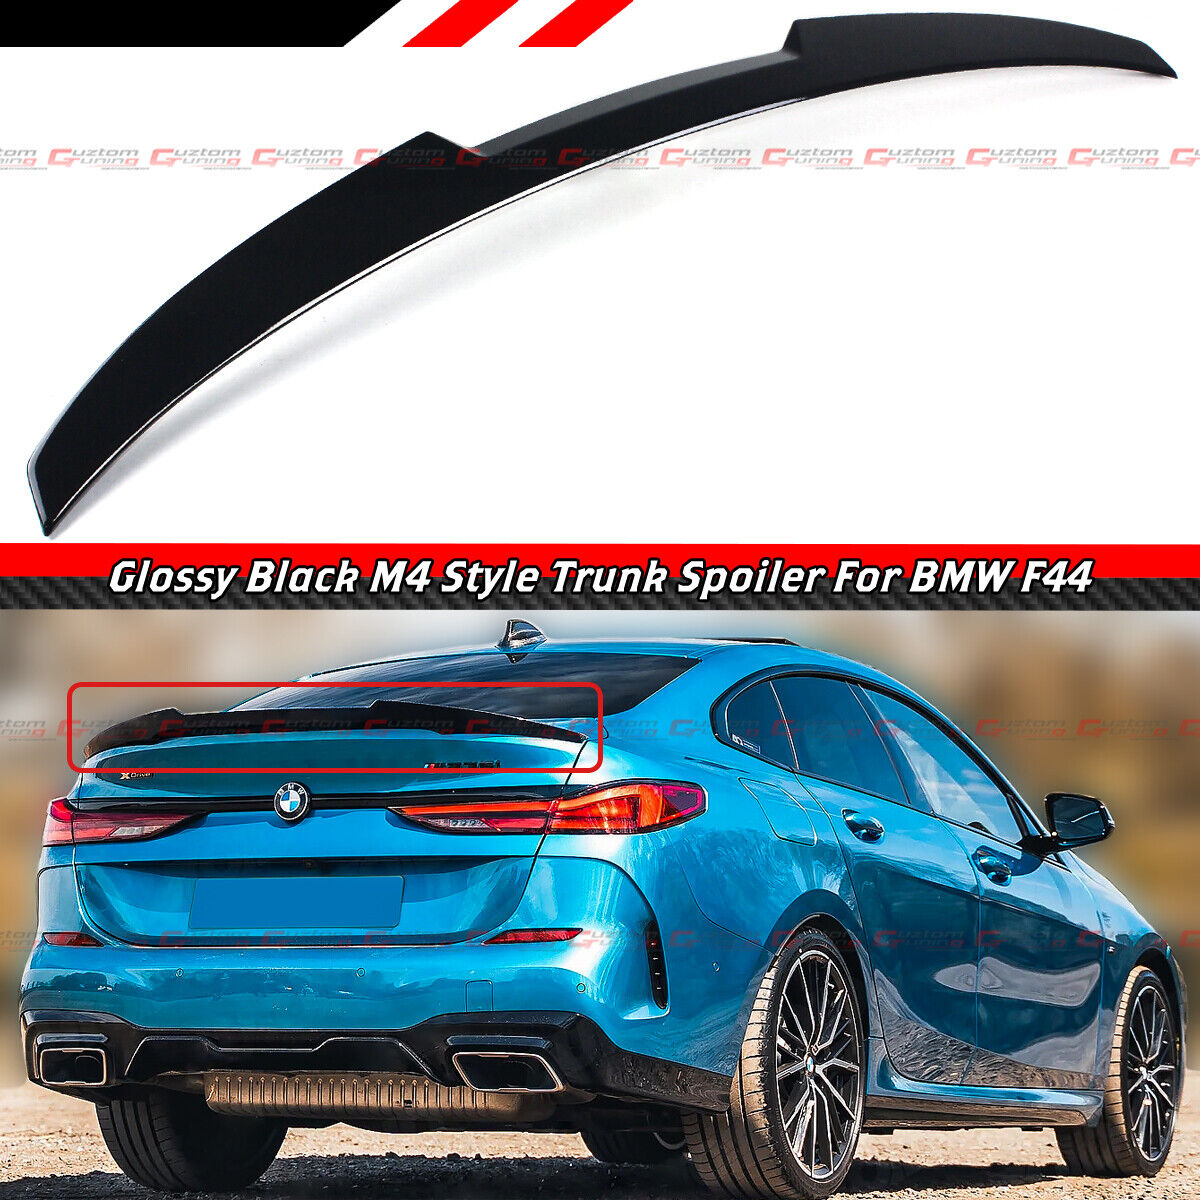 FOR 2020-23 BMW F44 228i M235i GRAN COUPE BLACK M4 STYLE HIGHKICK TRUNK SPOILER